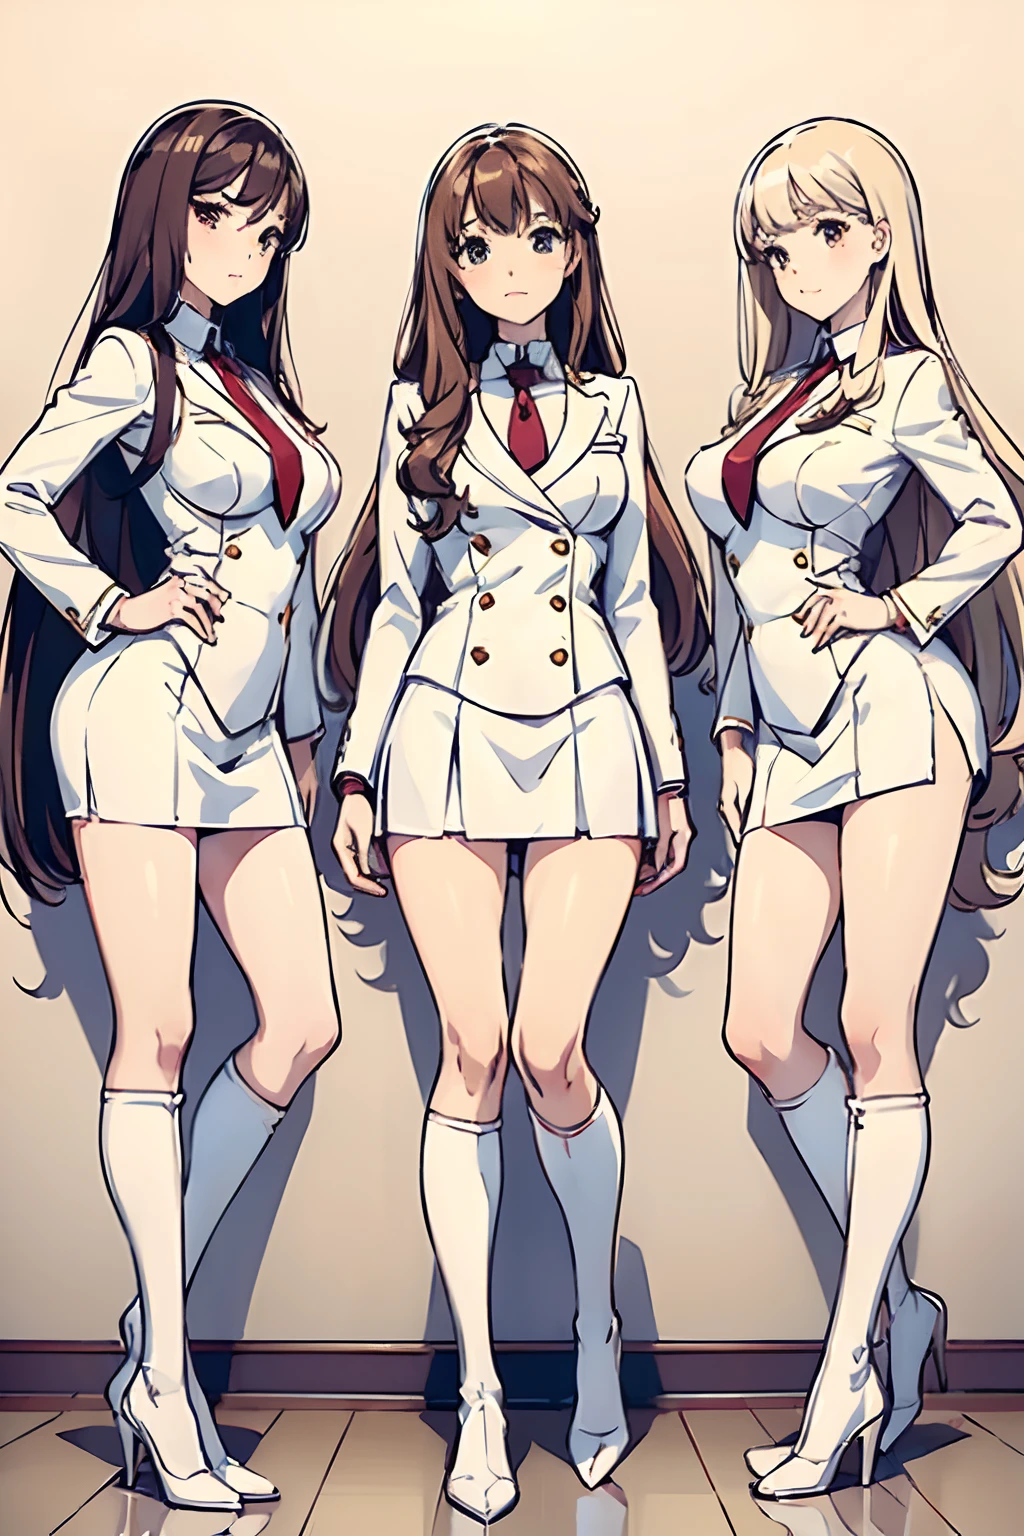 ((masterpiece, best quality, 8k, highres:1.2)), white skirt suit, highleg, hazel eyes, white blazer, neckties, medium breasts, white pencil skirt, white thighhigh heeled boots, (curly hair, long hair, one brown haired sister, one blonde sister, one redhead sister), (3girls, trio, triplets, clones), ((matching hairstyles, different hair color, matching faces, matching outfits)), full body, same pose